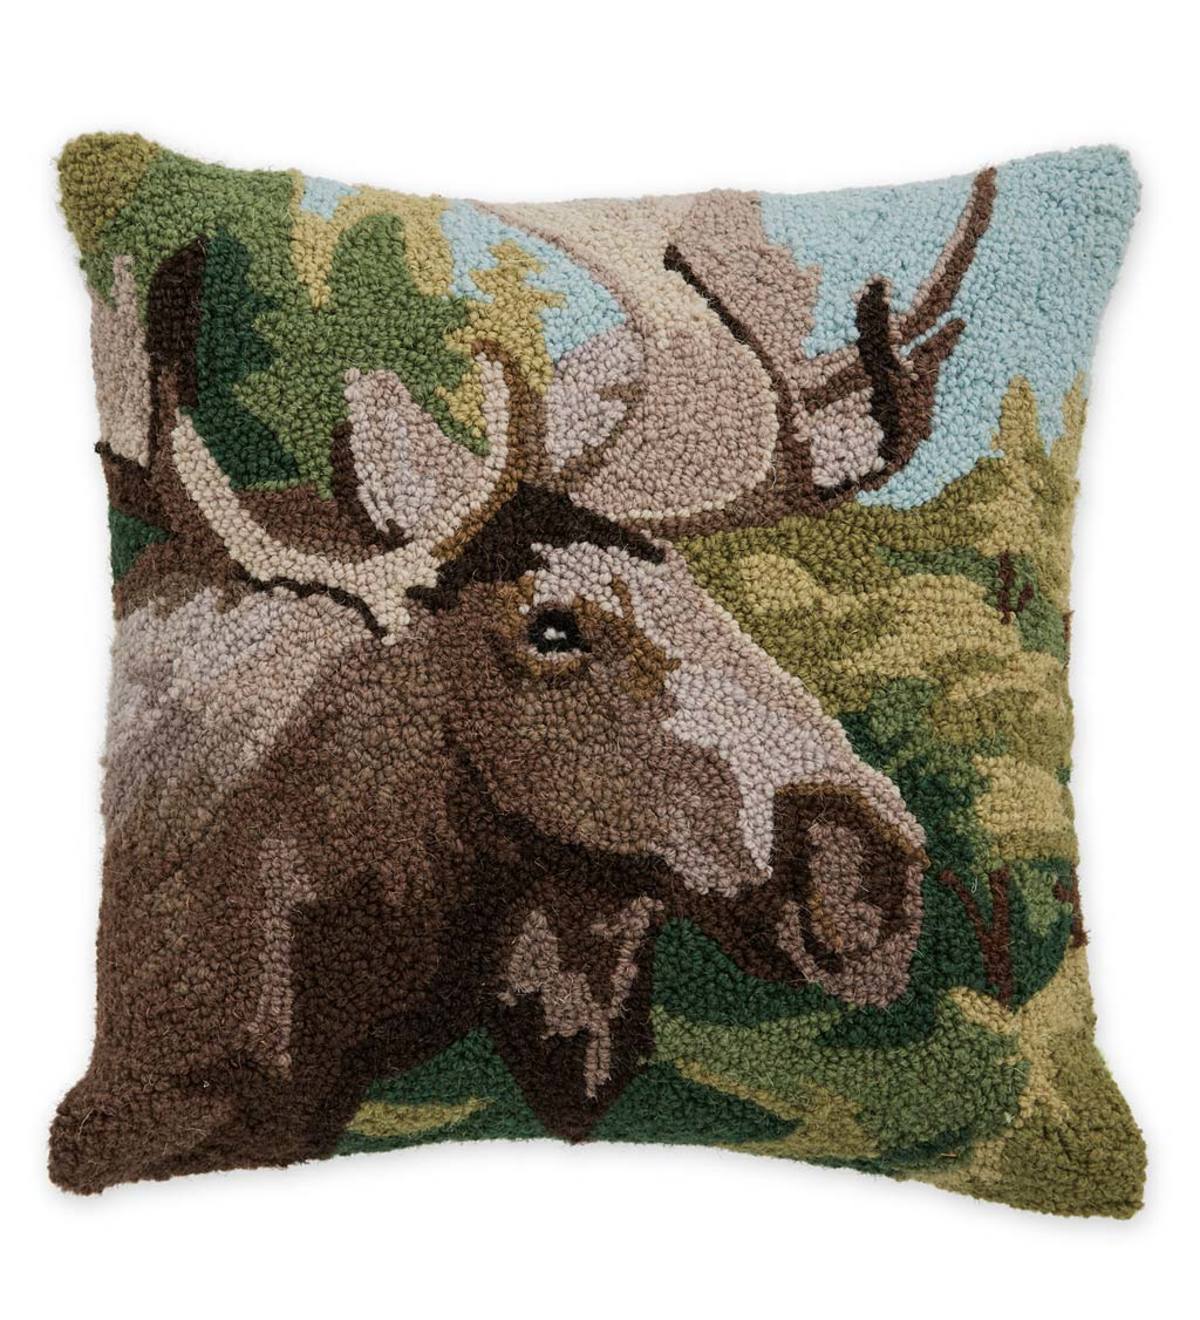 Moose Hand-Hooked Wool Throw Pillow